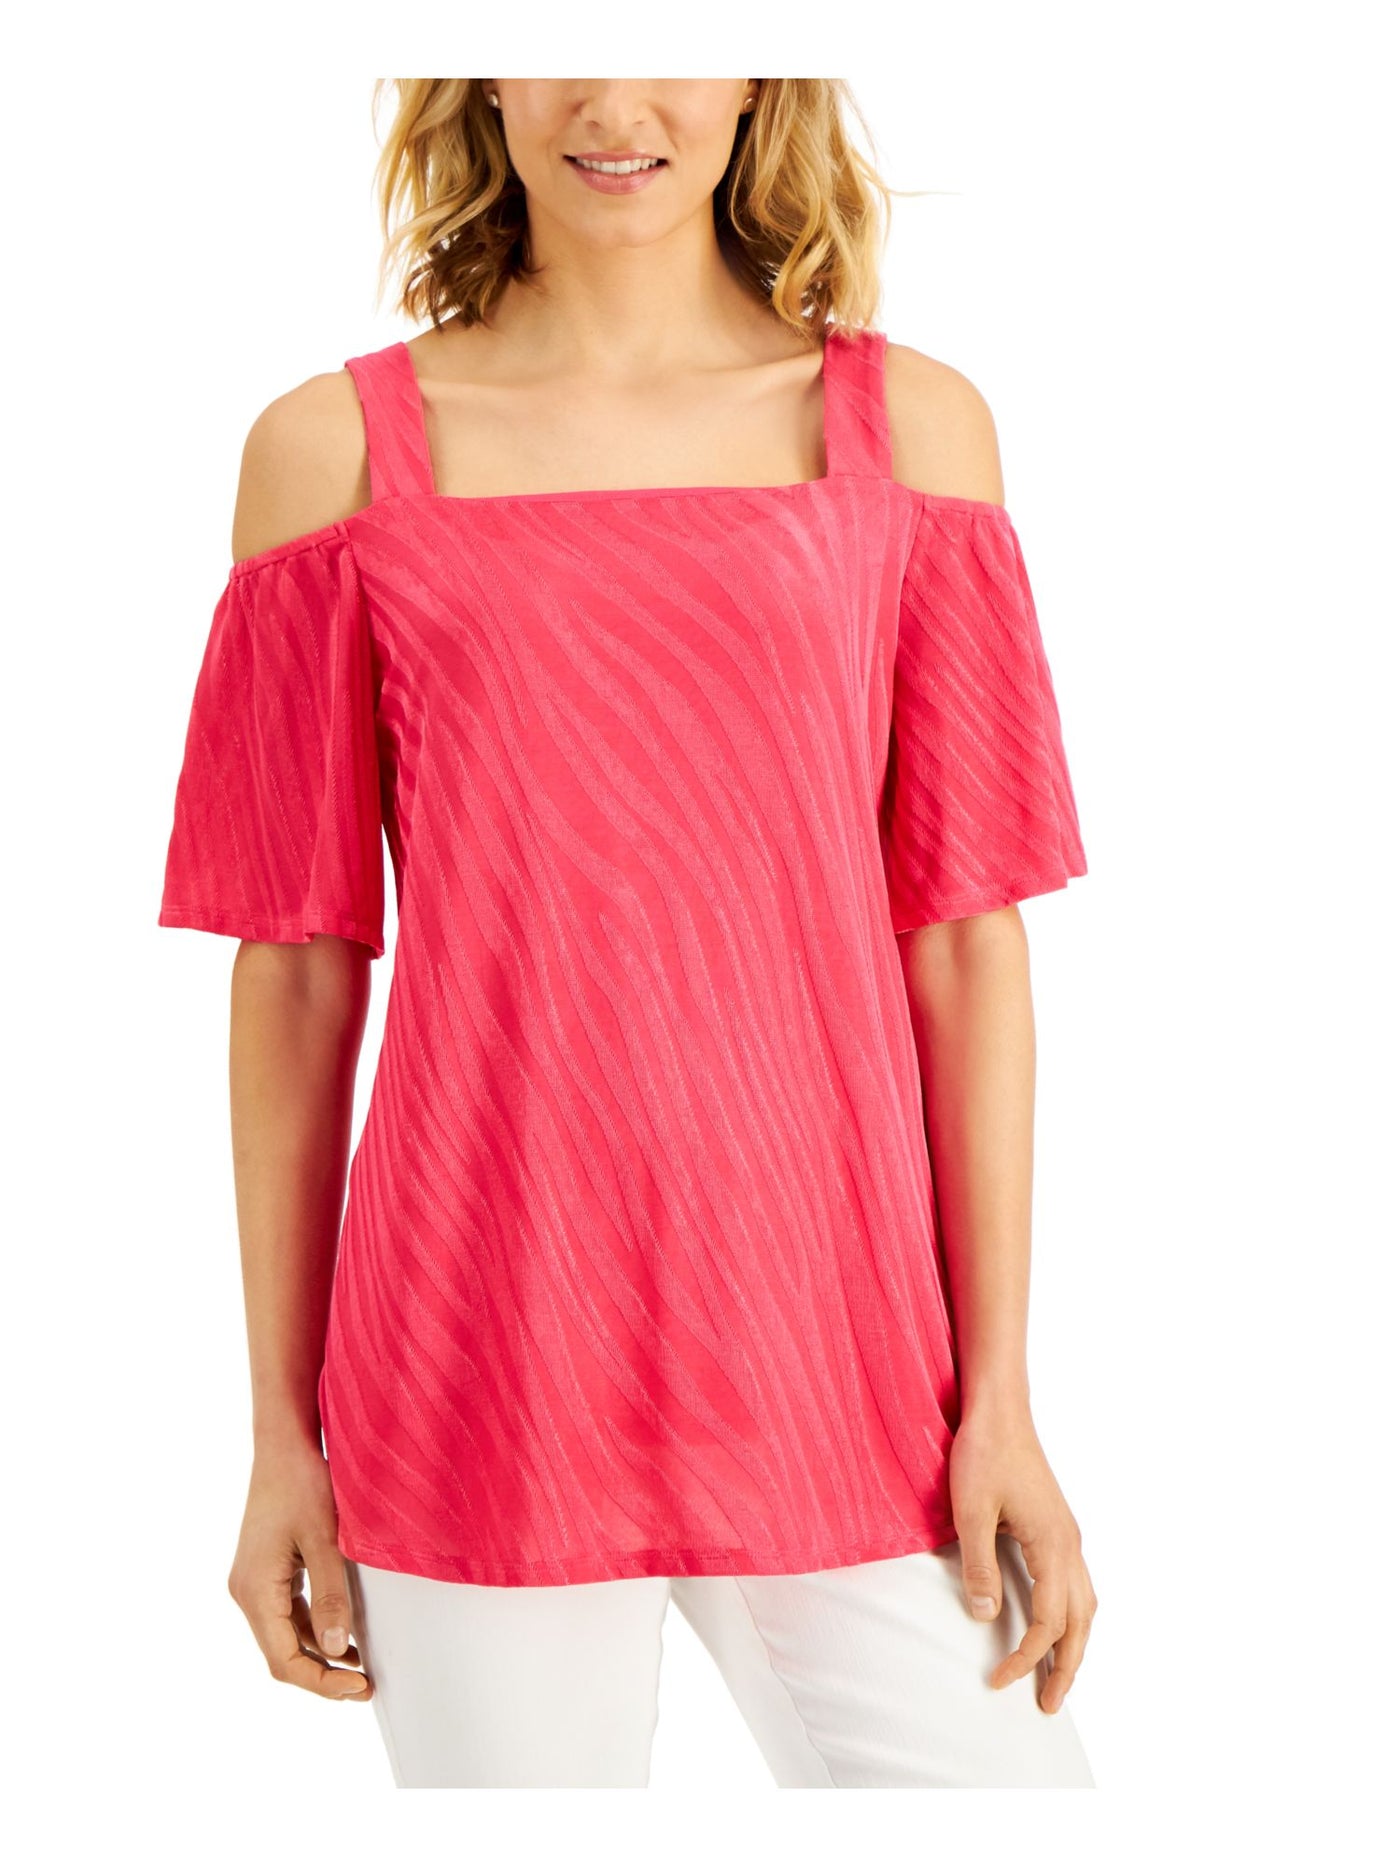 JM COLLECTION Womens Pink Cold Shoulder Relaxed Fit Short Sleeve Square Neck Wear To Work Top S